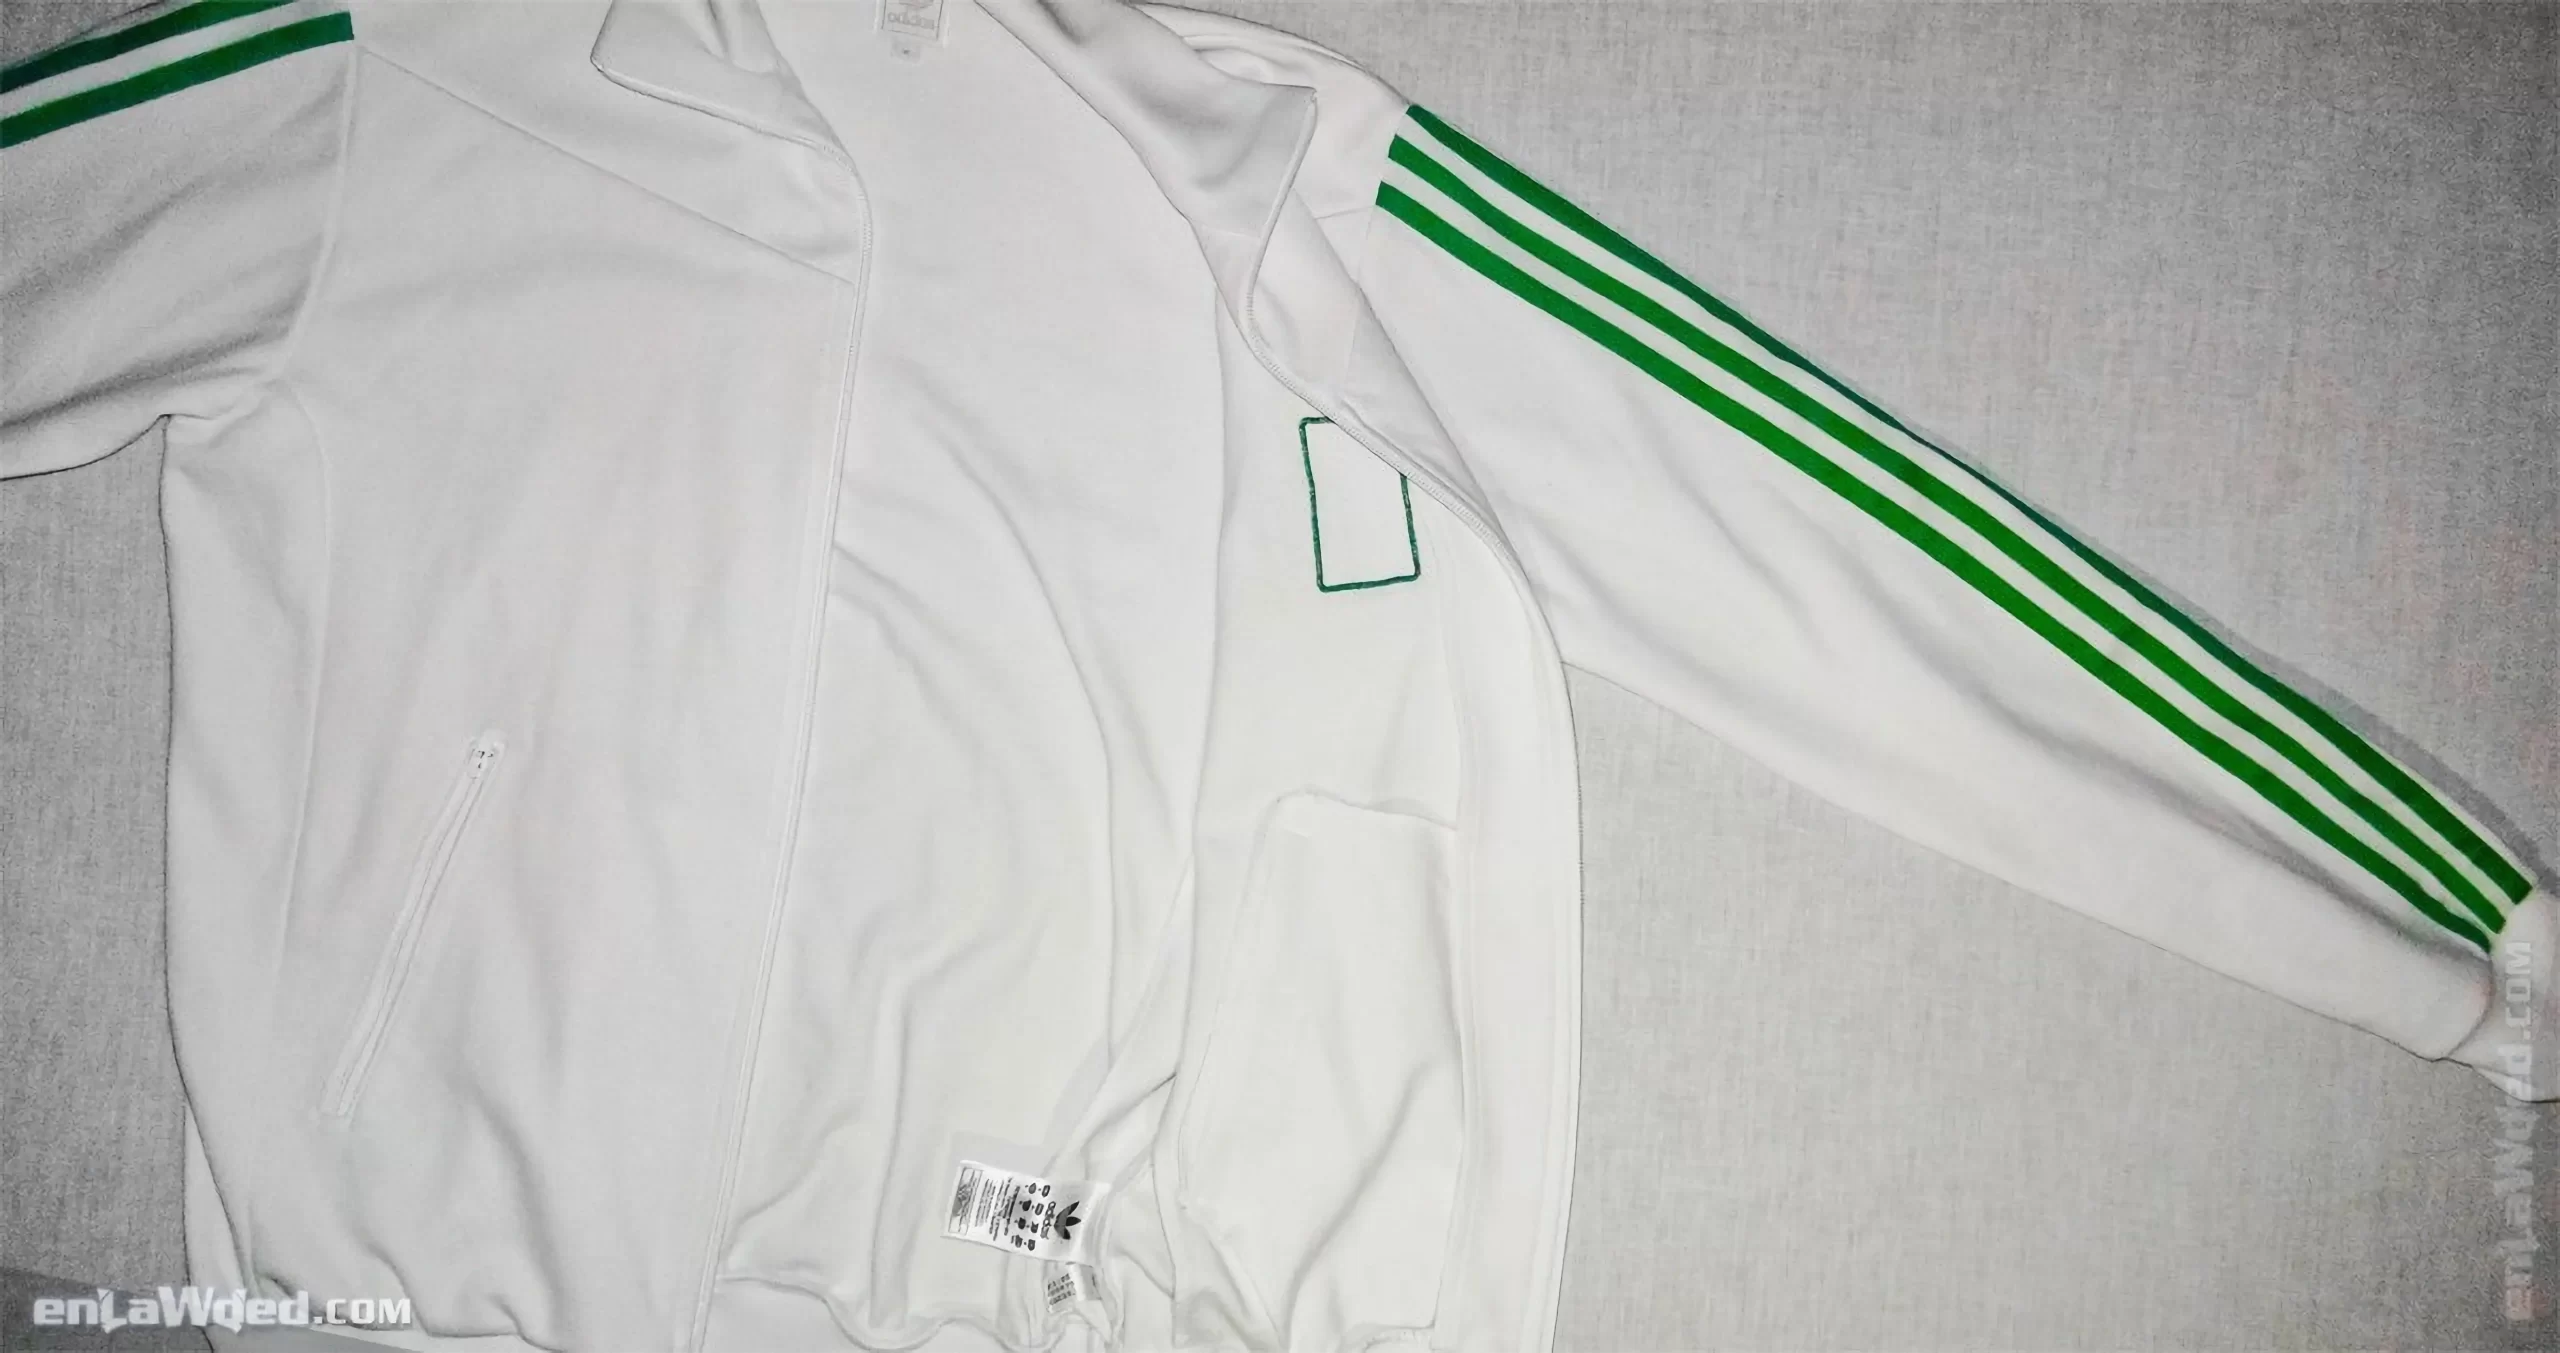 Men’s 2005 Stan Smith Track Top by Adidas Originals: Emphasize (EnLawded.com file #lmcfbbq9wy0rogoe6nc)